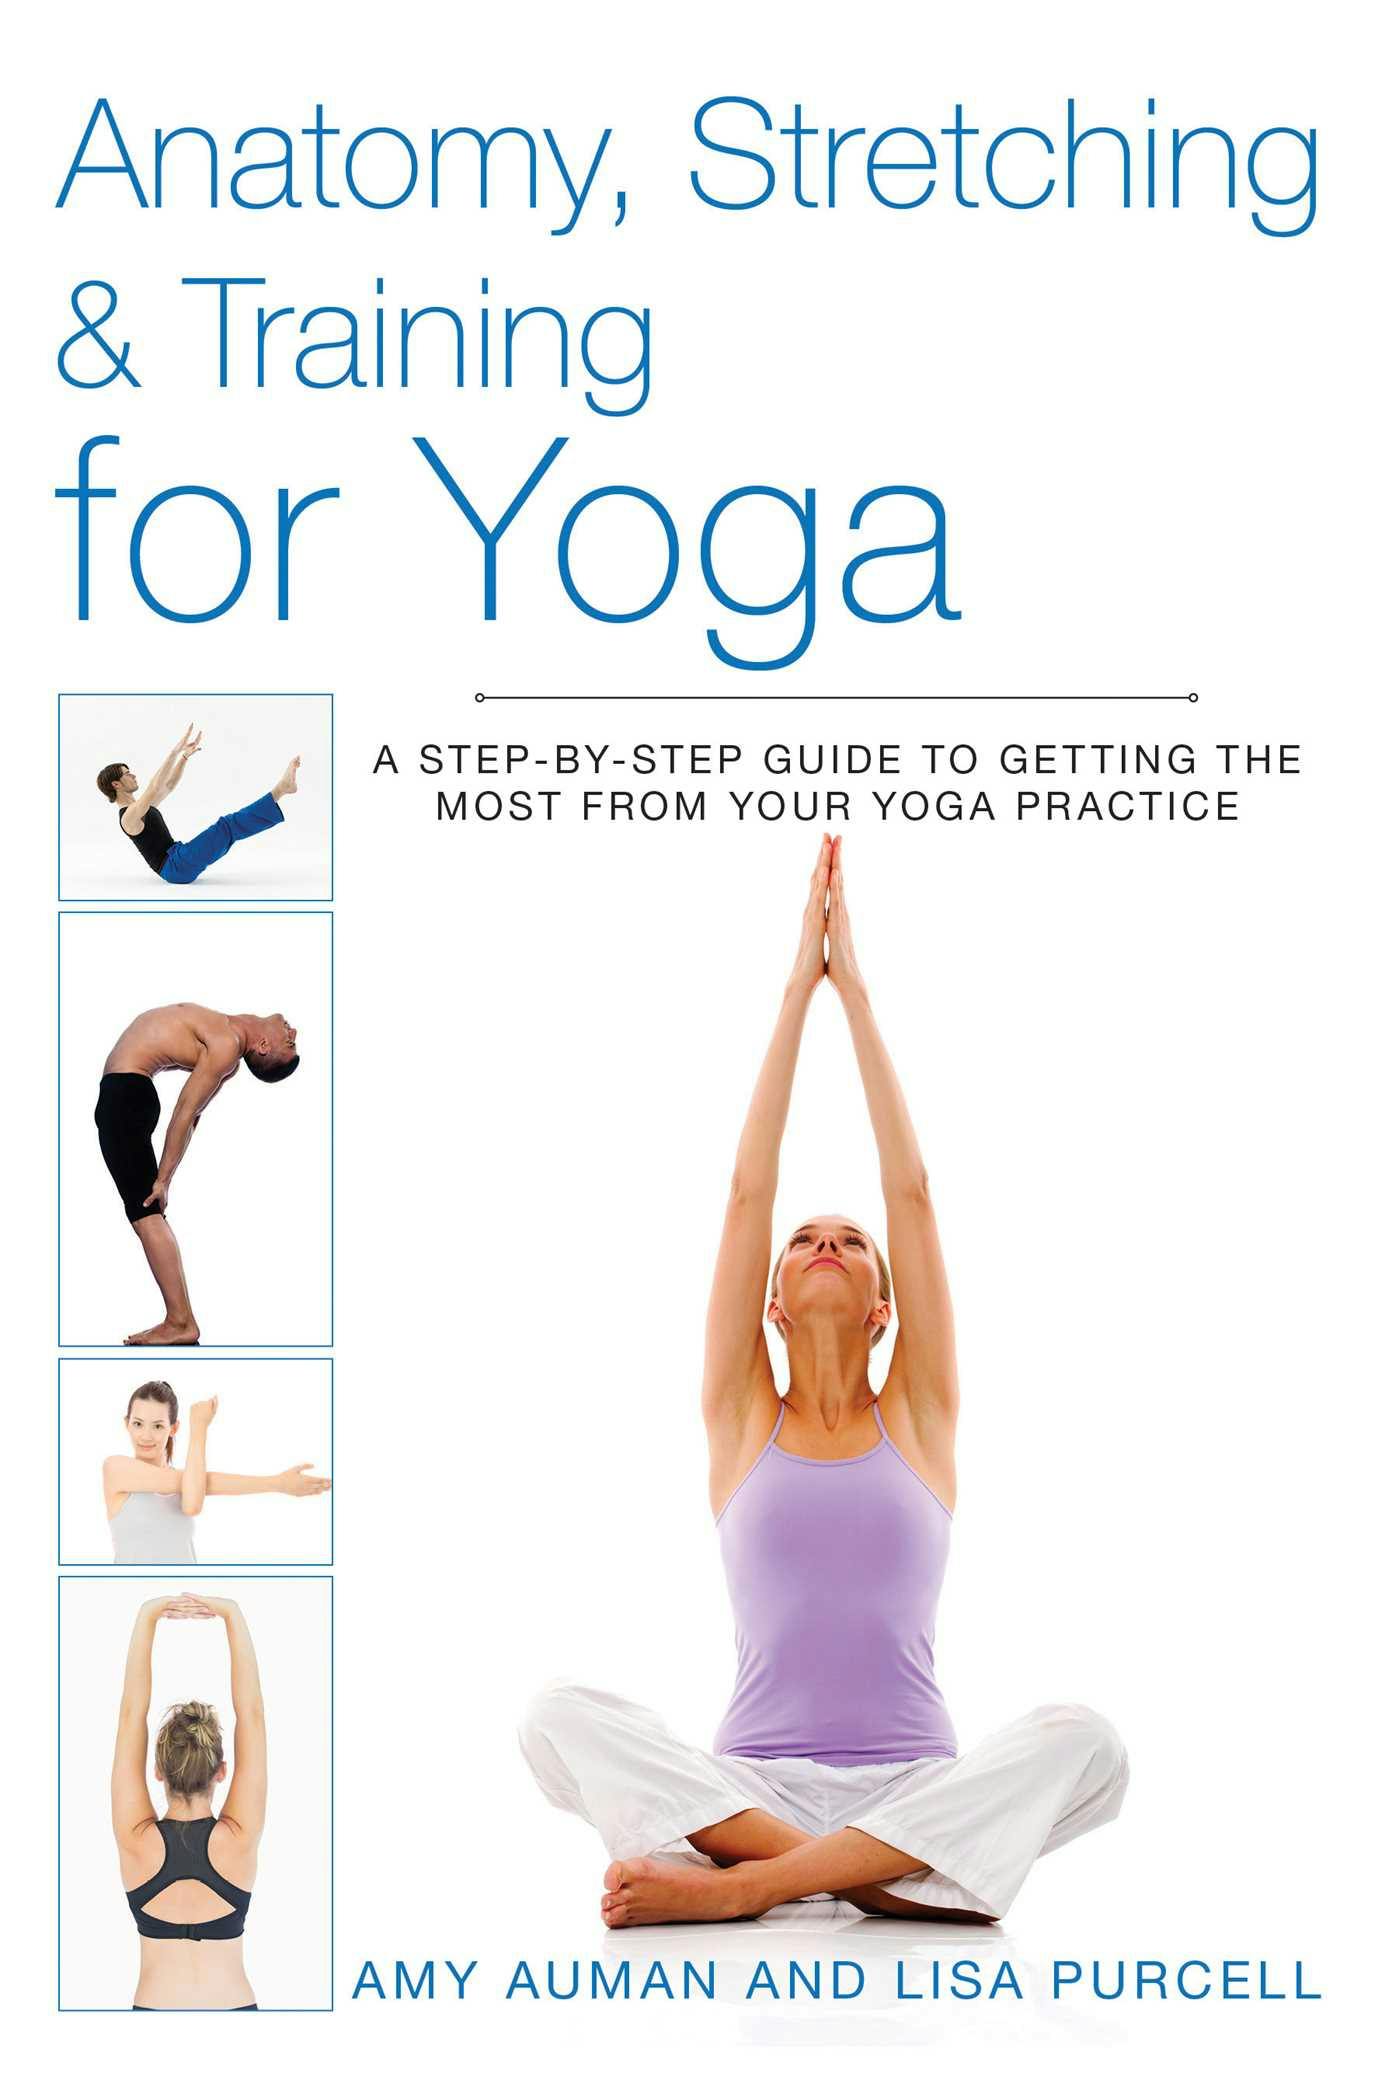 Anatomy, Stretching & Training for Yoga: A Step-by-Step Guide to Getting the Most from Your Yoga Practice - Lisa Purcell, Amy Auman